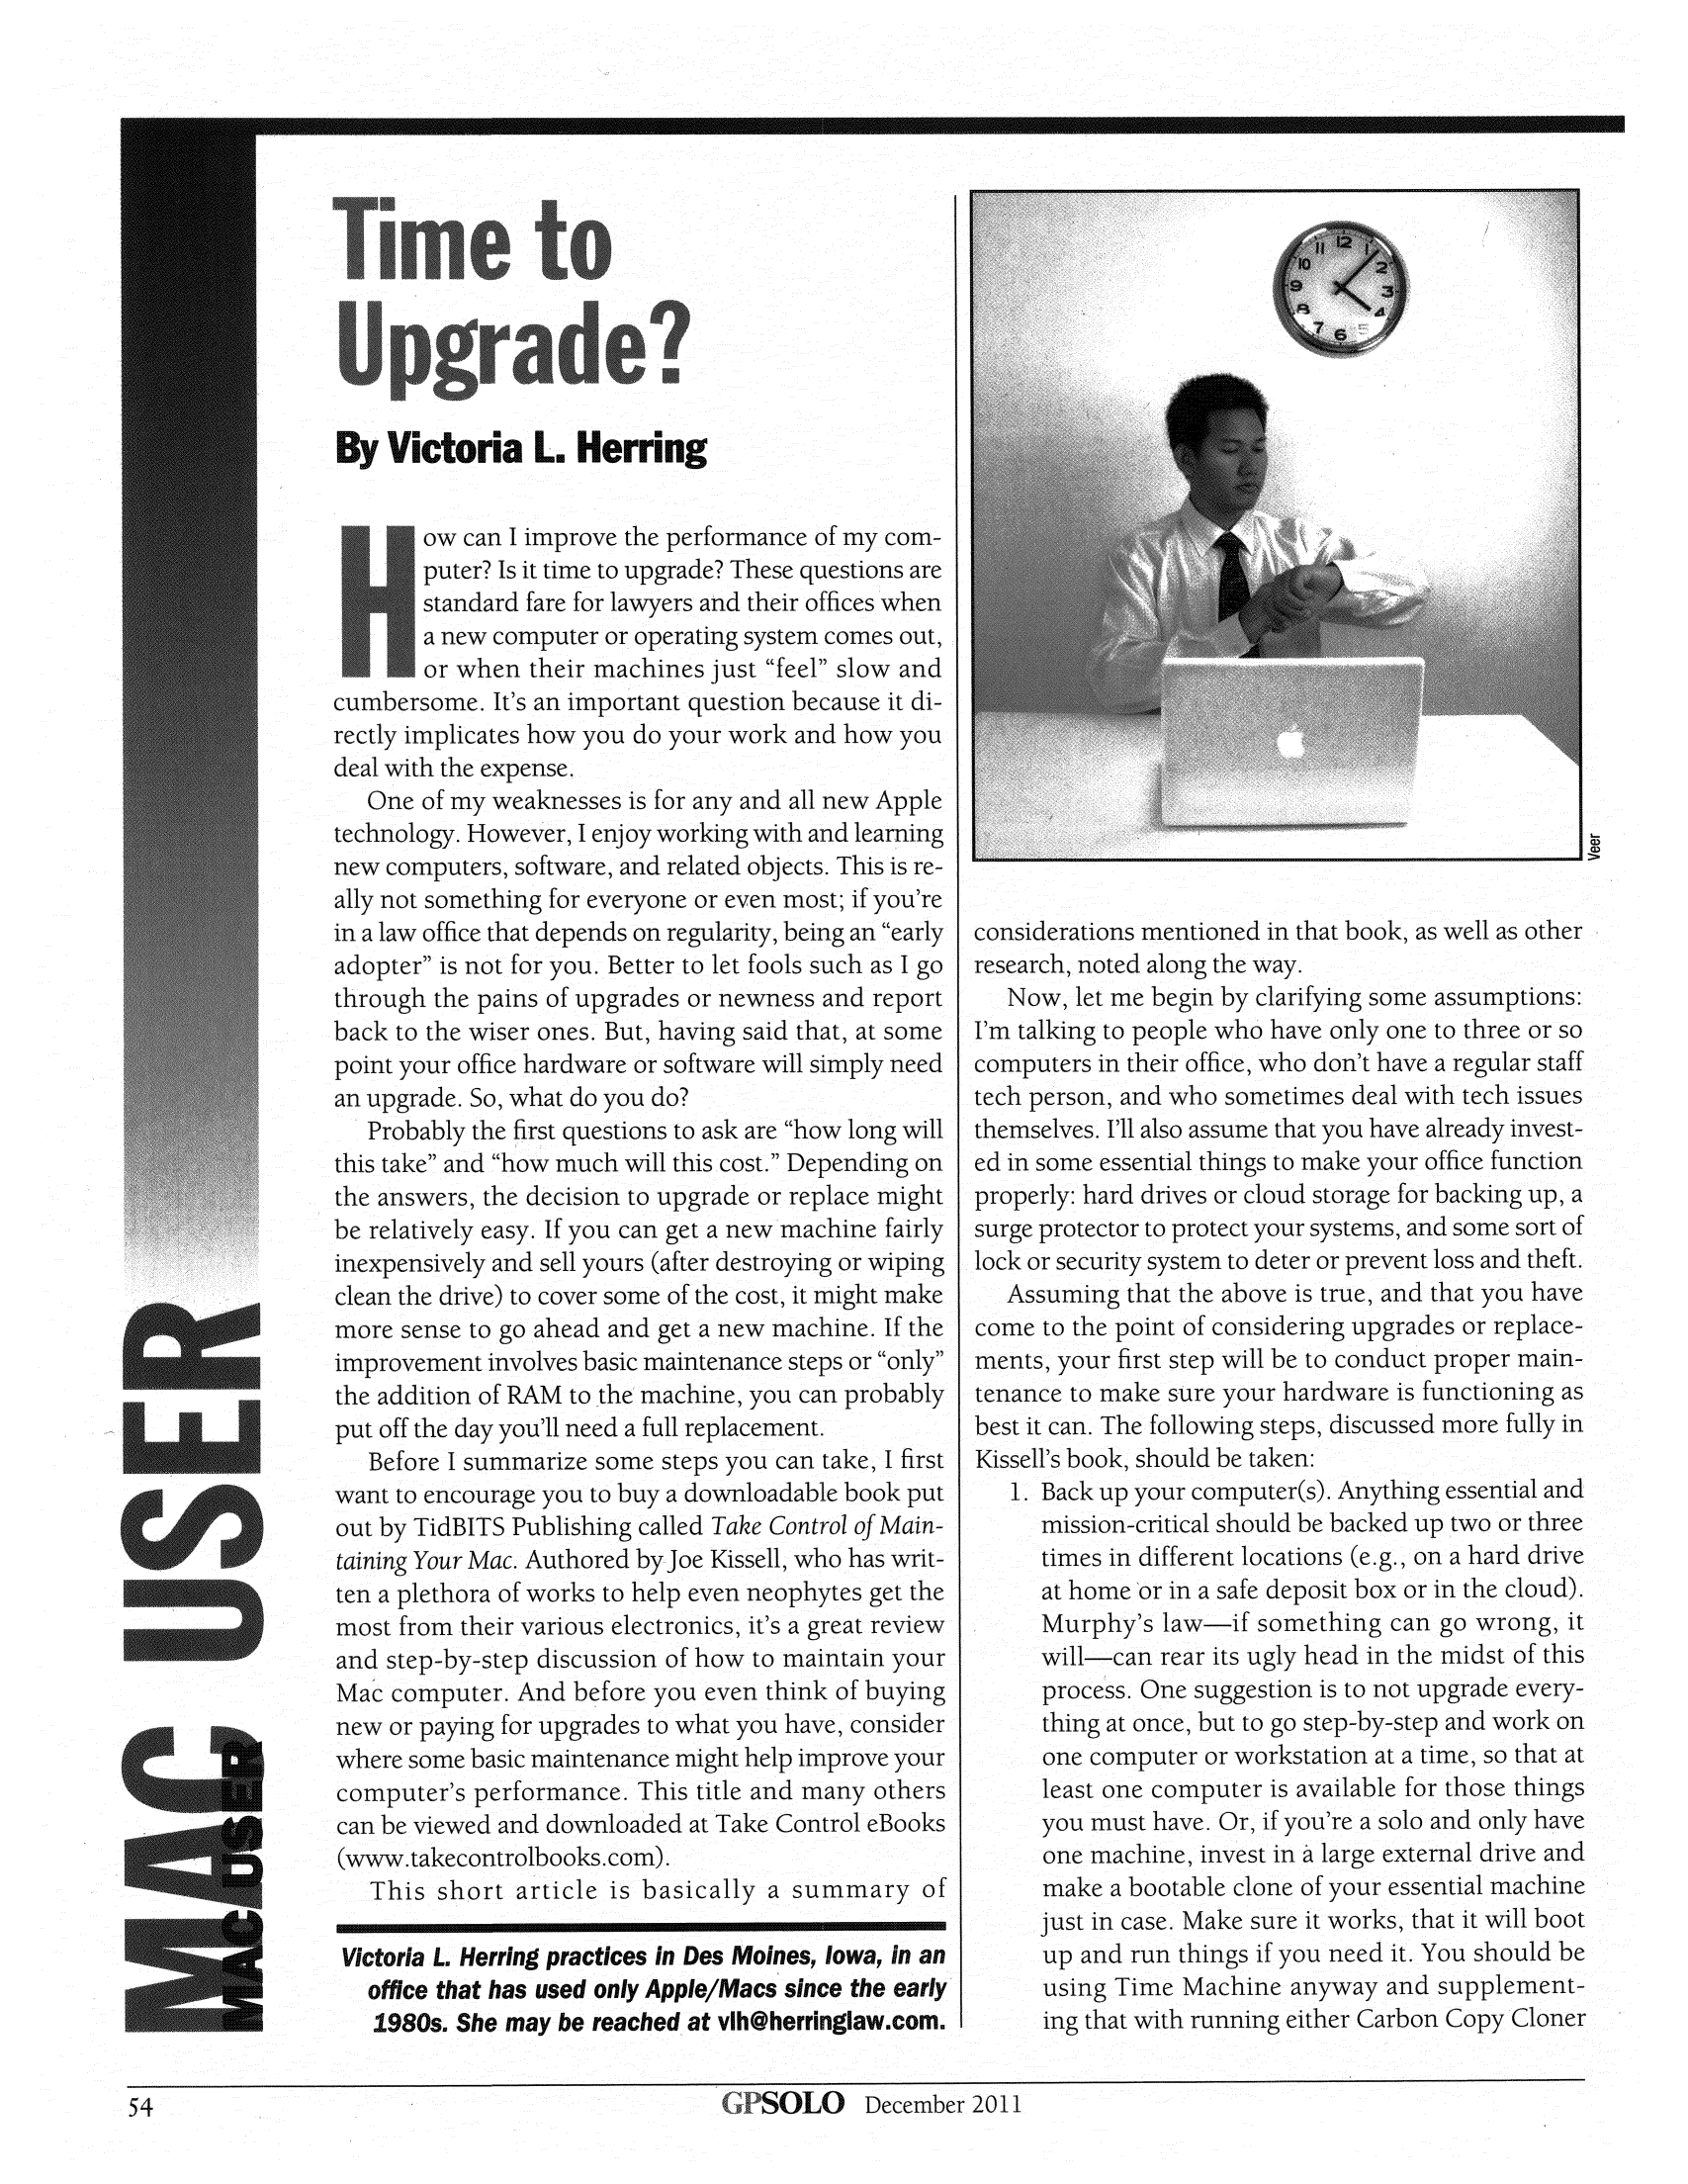 handle is hein.journals/gpsolo28 and id is 492 raw text is: By Victoria L. HerringIow can I improve the performance of my com-puter? Is it time to upgrade? These questions arestandard fare for lawyers and their offices whena new computer or operating system comes out,or-when their machines just feel slow andcumbersome. It's an important question because it di-rectly implicates how you do your work and how youdeal with the expense..One of my weaknesses is for any and all new Appletechnology. However, I enjoy working with and learningnew computers, software, and related objects. This is re-ally not something for everyone or even most; if you'rein a law office that depends on regularity, being an earlyadopter is not for you. Better to let fools such as I gothrough the pains of upgrades or newness and reportback to the wiser ones. But, having said that, at somepoint your office hardware or software will simply needan upgrade. So, what do you do?Probably the first questions to ask are how long willthis take and how much will this cost. Depending onthe answers, the decision to upgrade or replace mightbe relatively easy. If you can get a new machine fairlyinexpensively and sell yours (after destroying or wipingclean the drive) to cover some of the cost, it might makemore sense to go ahead and get a new machine. If the*        improvement involves basic maintenance steps or onlythe addition of RAM to the machine, you can probablyput off the day you'll need a full replacement.Before I summarize some steps you can take, I firstS        want to encourage you to buy a downloadable book putout by TidBITS Publishing called Take Control of Maintaining Your Mac. Authored by Joe Kissell, who has writ-S        ten a plethora of works to help even neophytes get themost from their various electronics, it's a great reviewand step-by-step discussion of how to maintain yourMac computer. And before you even think of buyingrn       new or paying for upgrades to what you have, considerwhere some basic maintenance might help improve yourcomputer's performance. This title and many othersAA       can be viewed and downloaded at Take Control eBooks(www.takecontrolbooks.com).This short article is basically a summary ofVictoria L. Herring practices in Des Moines, Iowa, in anoffice that has used only Appie/Macs since the early1980s. She may be reached at vlh@herringlaw.com.considerations mentioned in that book, as well as otherresearch, noted along the way.Now, let me begin by clarifying some assumptions:I'm talking to people who have only one to three or socomputers in their office, who don't have a regular stafftech person, and who sometimes deal with tech issuesthemselves. I'll also assume that you have already invest-ed in some essential things to make your office functionproperly: hard drives or cloud storage for backing up, asurge protector to protect your systems, and some sort oflock or security system to deter or prevent loss and theft.Assuming that the above is true, and that you havecome to the point of considering upgrades or replace-ments, your first step will be to conduct proper main-tenance to make sure your hardware is functioning asbest it can. The following steps, discussed more fully inKissell's book, should be taken:1. Back up your computer(s). Anything essential andmission-critical should be backed up two or threetimes in different locations (e.g., on a hard driveat home or in a safe deposit box or in the cloud).Murphy's law-if something can go wrong, itwill-can rear its ugly head in the midst of thisprocess. One suggestion is to not upgrade every-thing at once, but to go step-by-step and work onone computer or workstation at a time, so that atleast one computer is available for those thingsyou must have. Or, if you're a solo and only haveone machine, invest in a large external drive andmake a bootable clone of your essential machinejust in case. Make sure it works, that it will bootup and run things if you need it. You should beusing Time Machine anyway and supplement-ing that with running either Carbon Copy Cloner54                                                   ~SOLO     December 2011SOLO December 201154